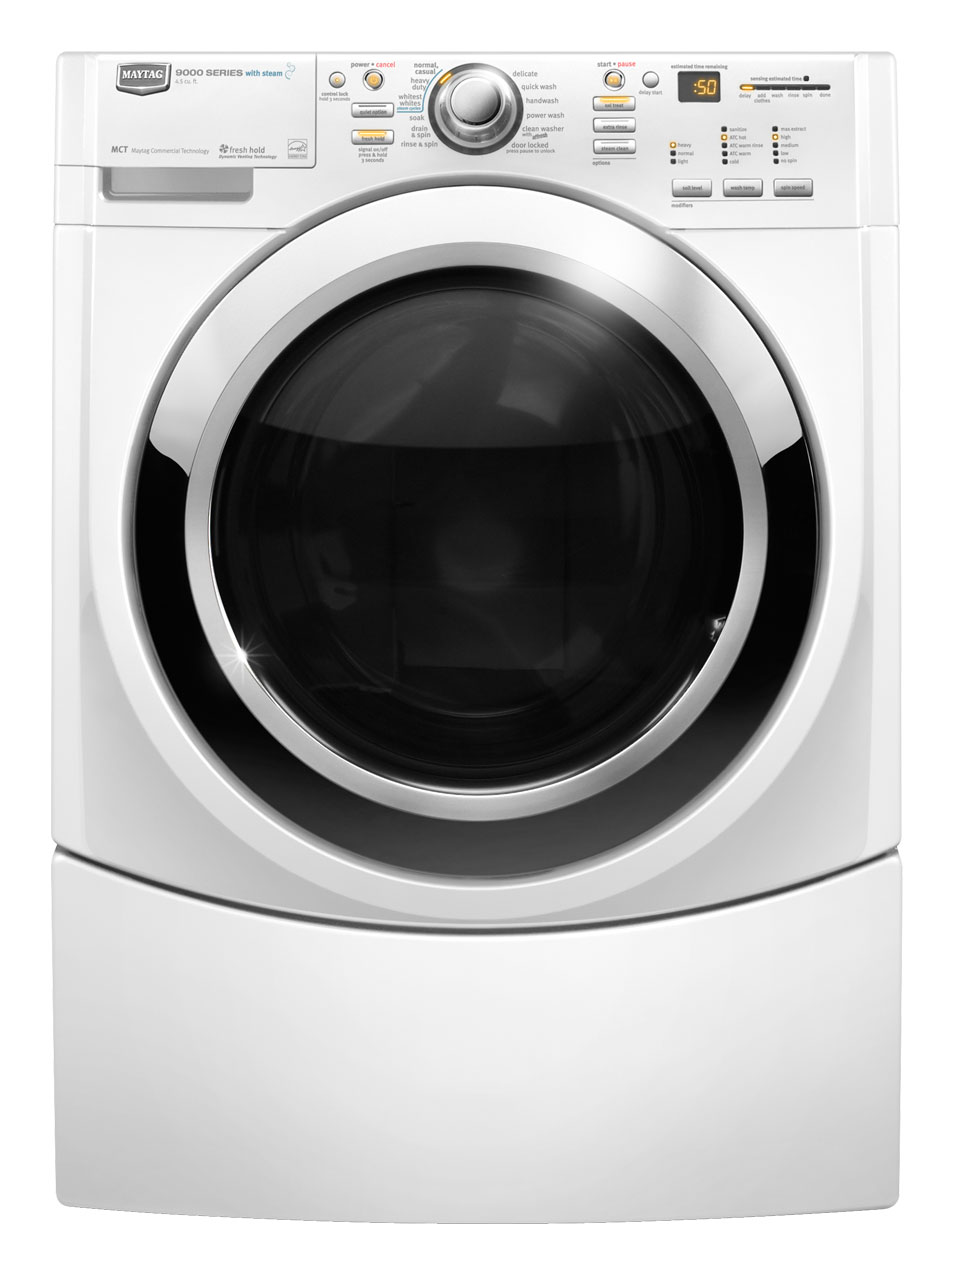 Review of Maytag Performance 3.9 cu ft High-Efficiency Front-Load Washers (White) ENERGY STAR (Model #: MHWE950WW)